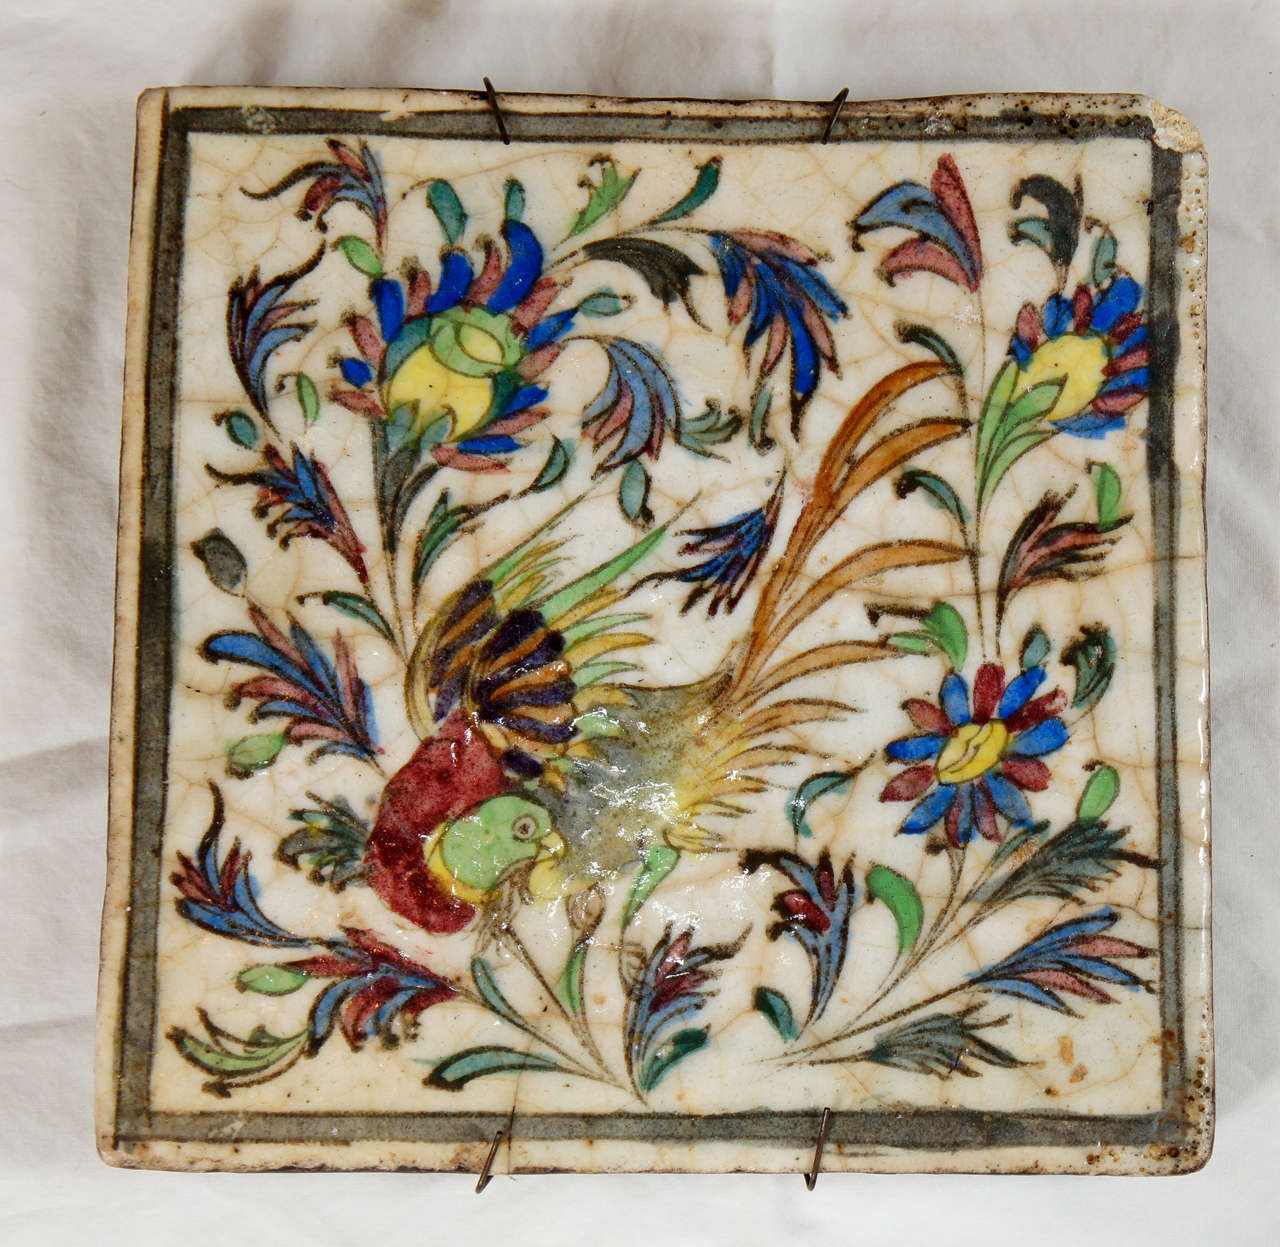 A Persian hand-painted Terra Cotta Tile